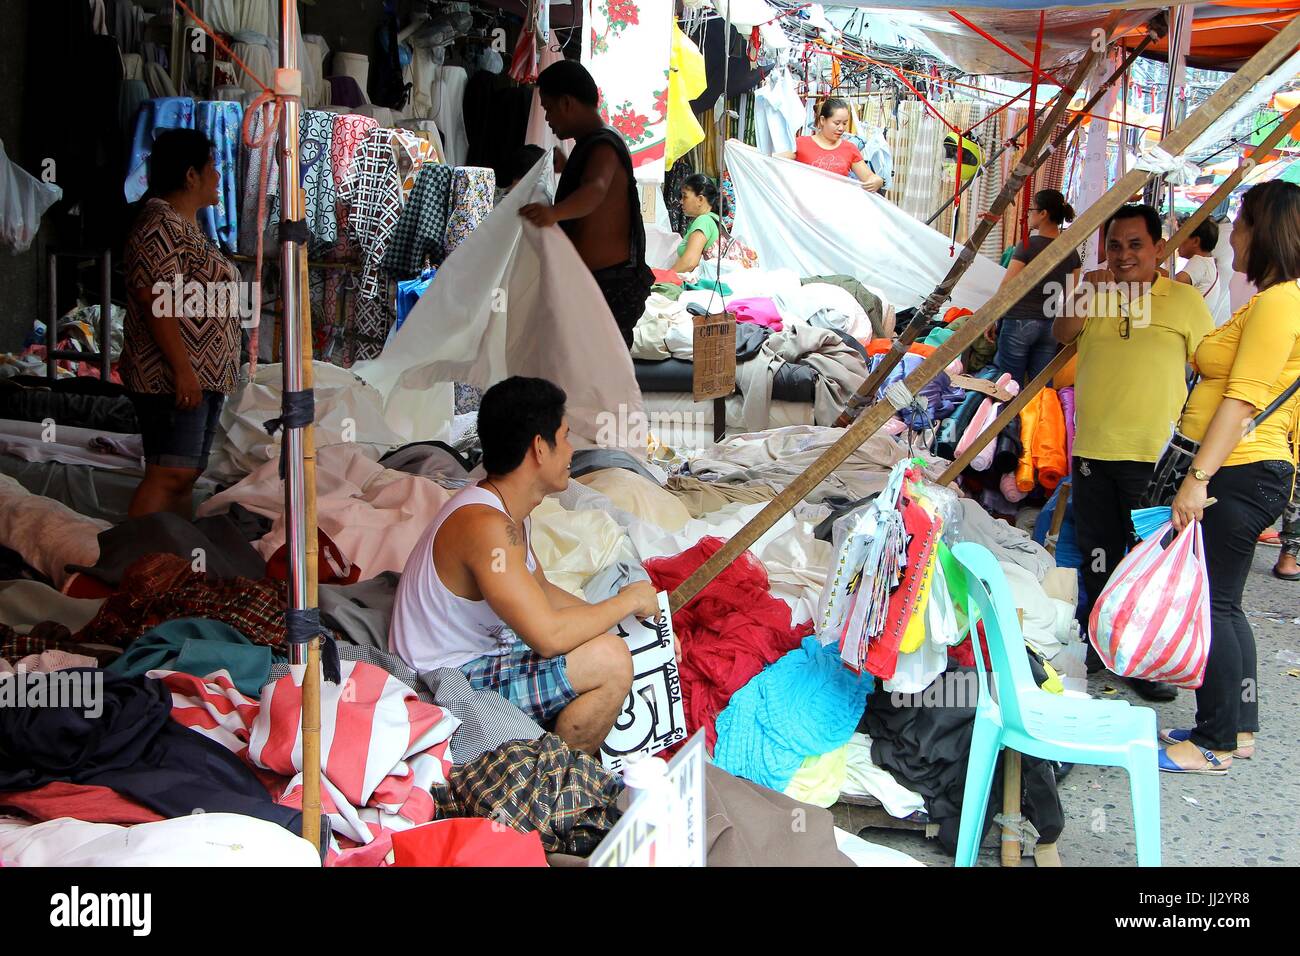 Philippines. 17th July, 2017. A sales person assisted their customer at Divisoria Market in Ylaya Street. Manila City on July 17, 2017. Divisoria Market is the heaven place for all fashion designers where they bought all their materials for making dress at the cheapest price from US$ 0.50 pesos per yard of textiles depends on the kind of textiles. For budget conscious customers they can buy a readymade dress from 500.00 and wedding gowns that stars from US$ 30 per set. Credit: Gregorio B. Dantes Jr./Pacific Press/Alamy Live News Stock Photo